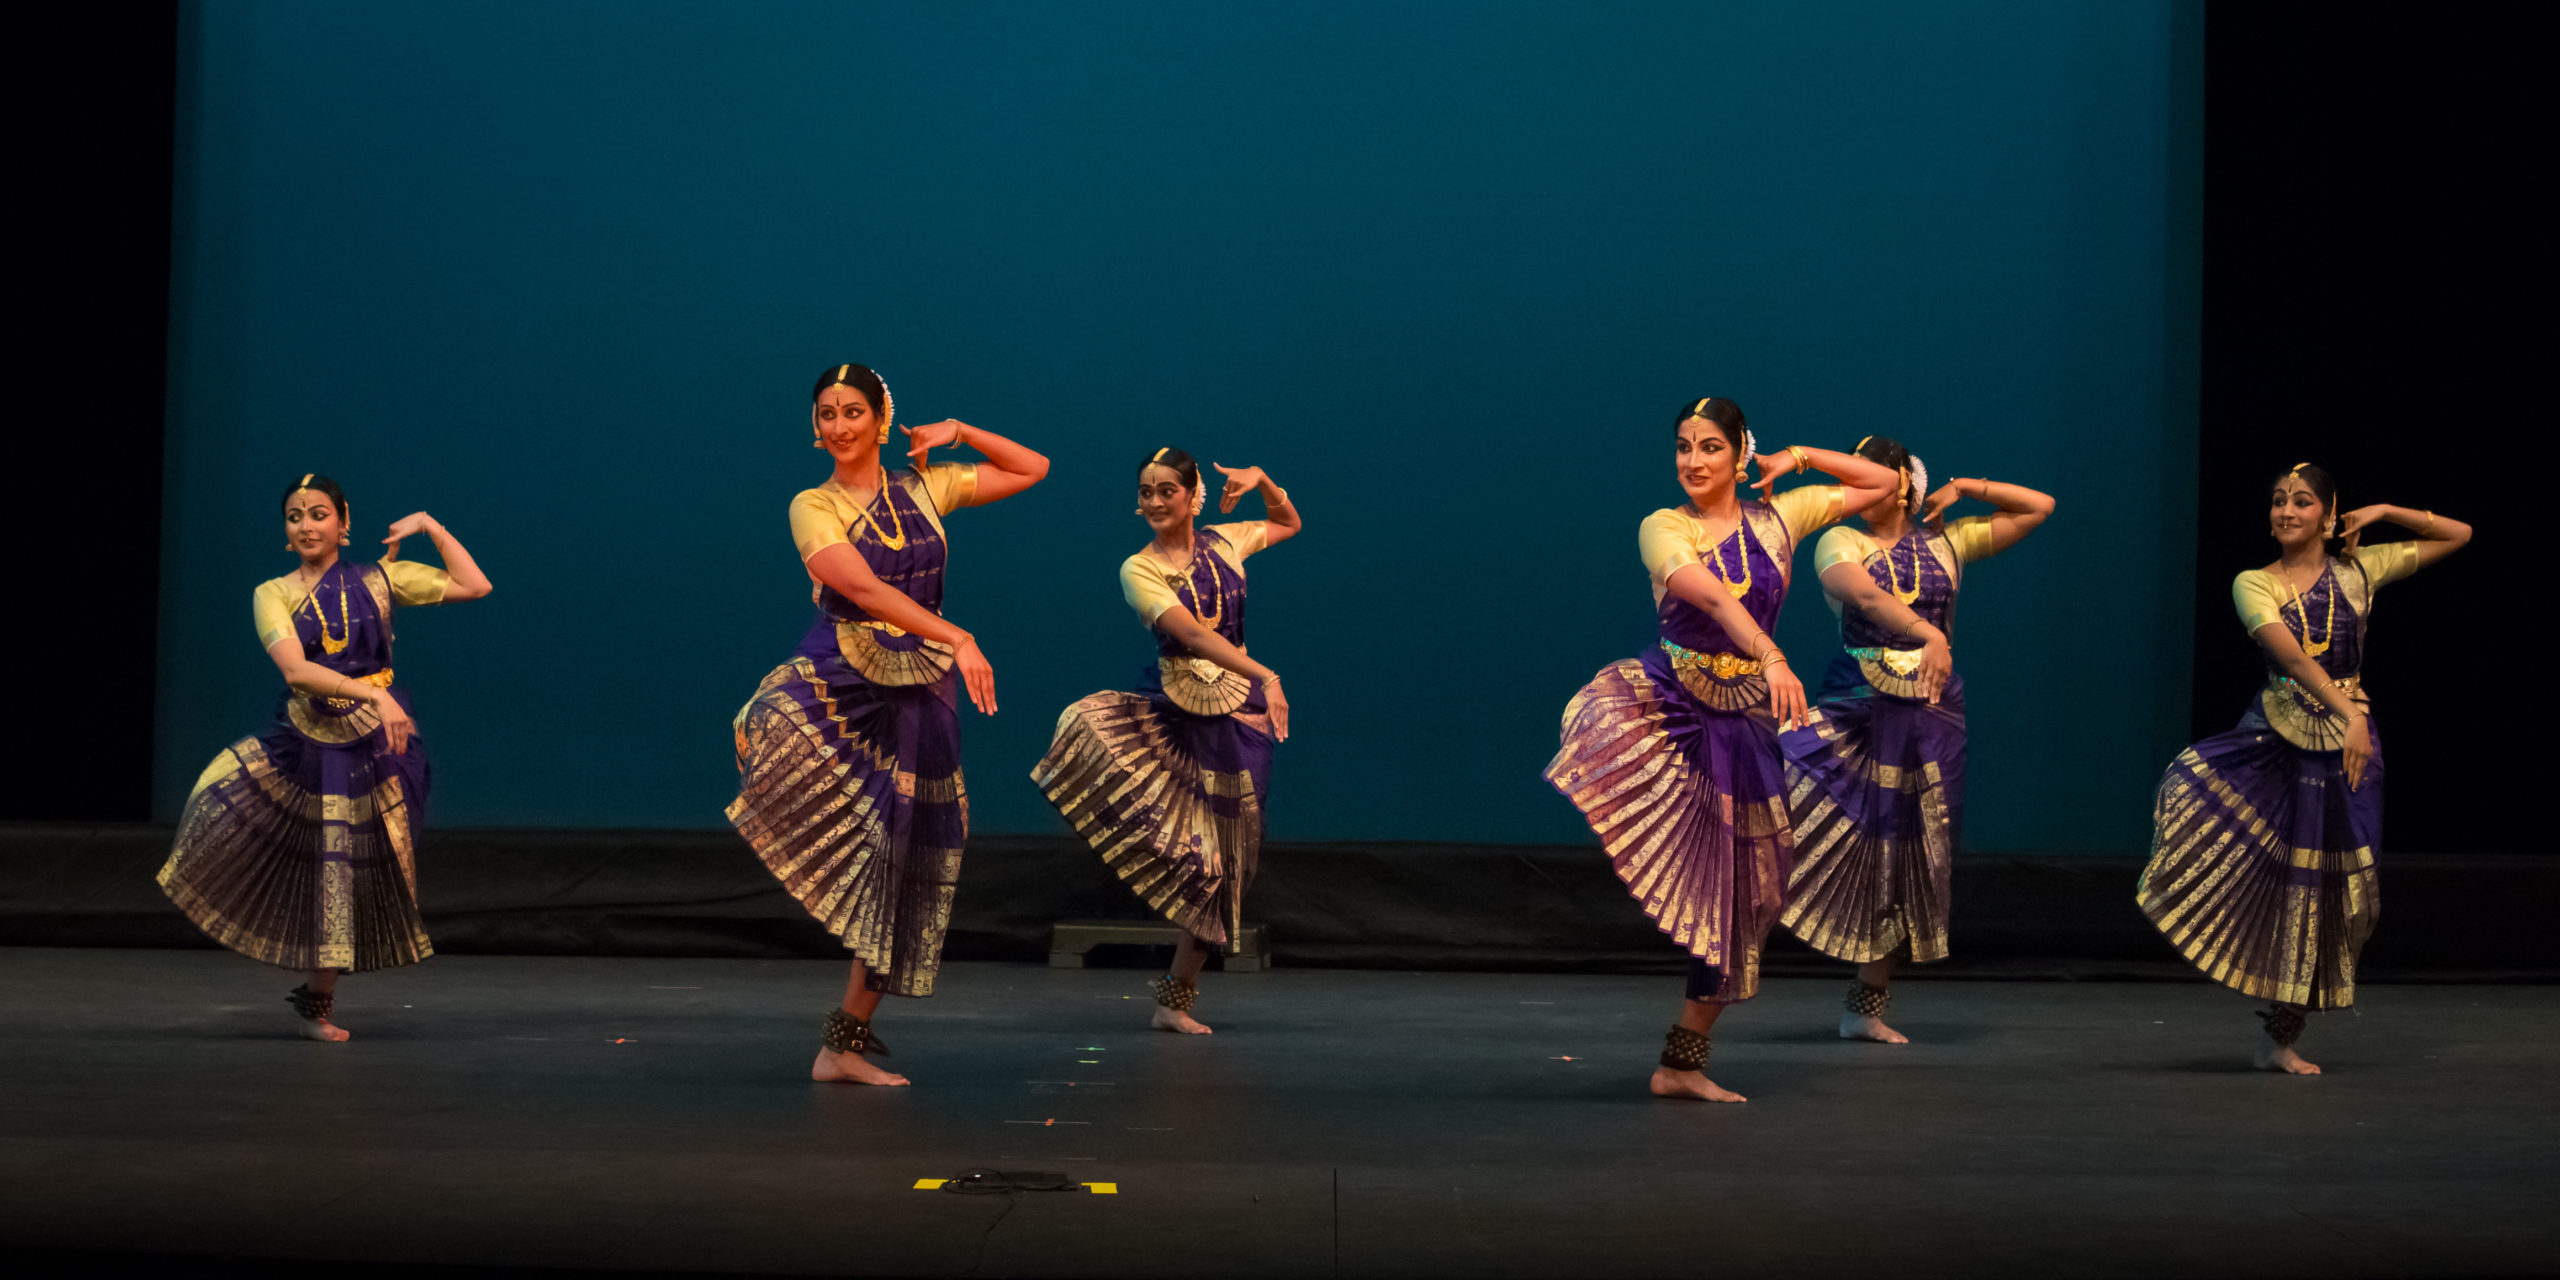 Group of female Indian dancers mid-movement on stage